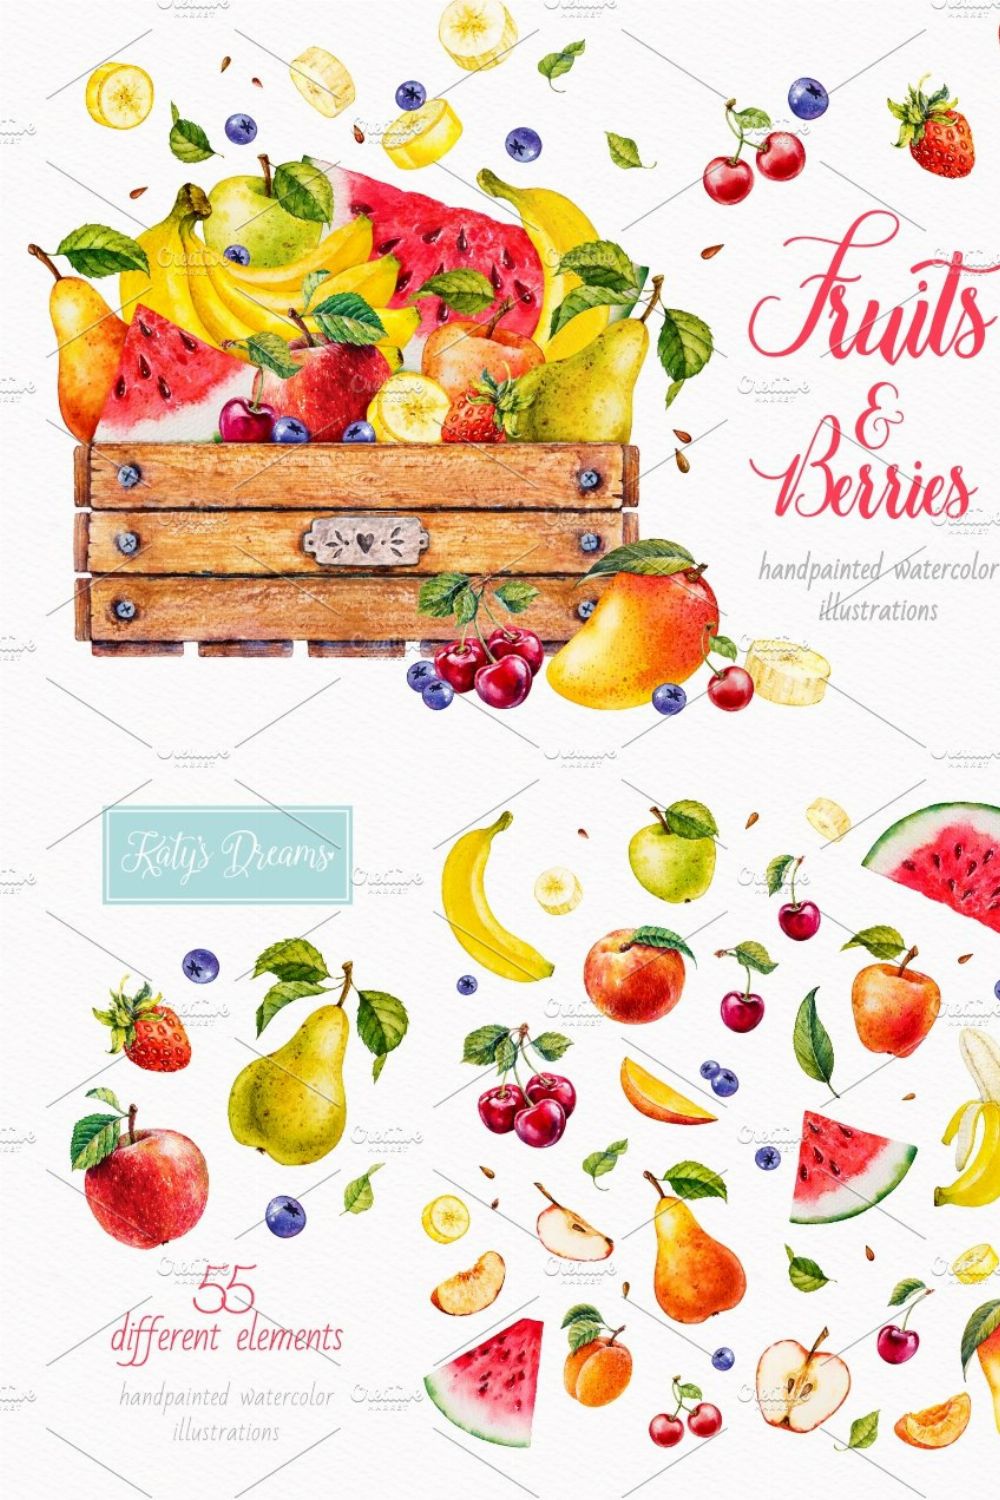 Fruits and berries. Watercolor. pinterest preview image.